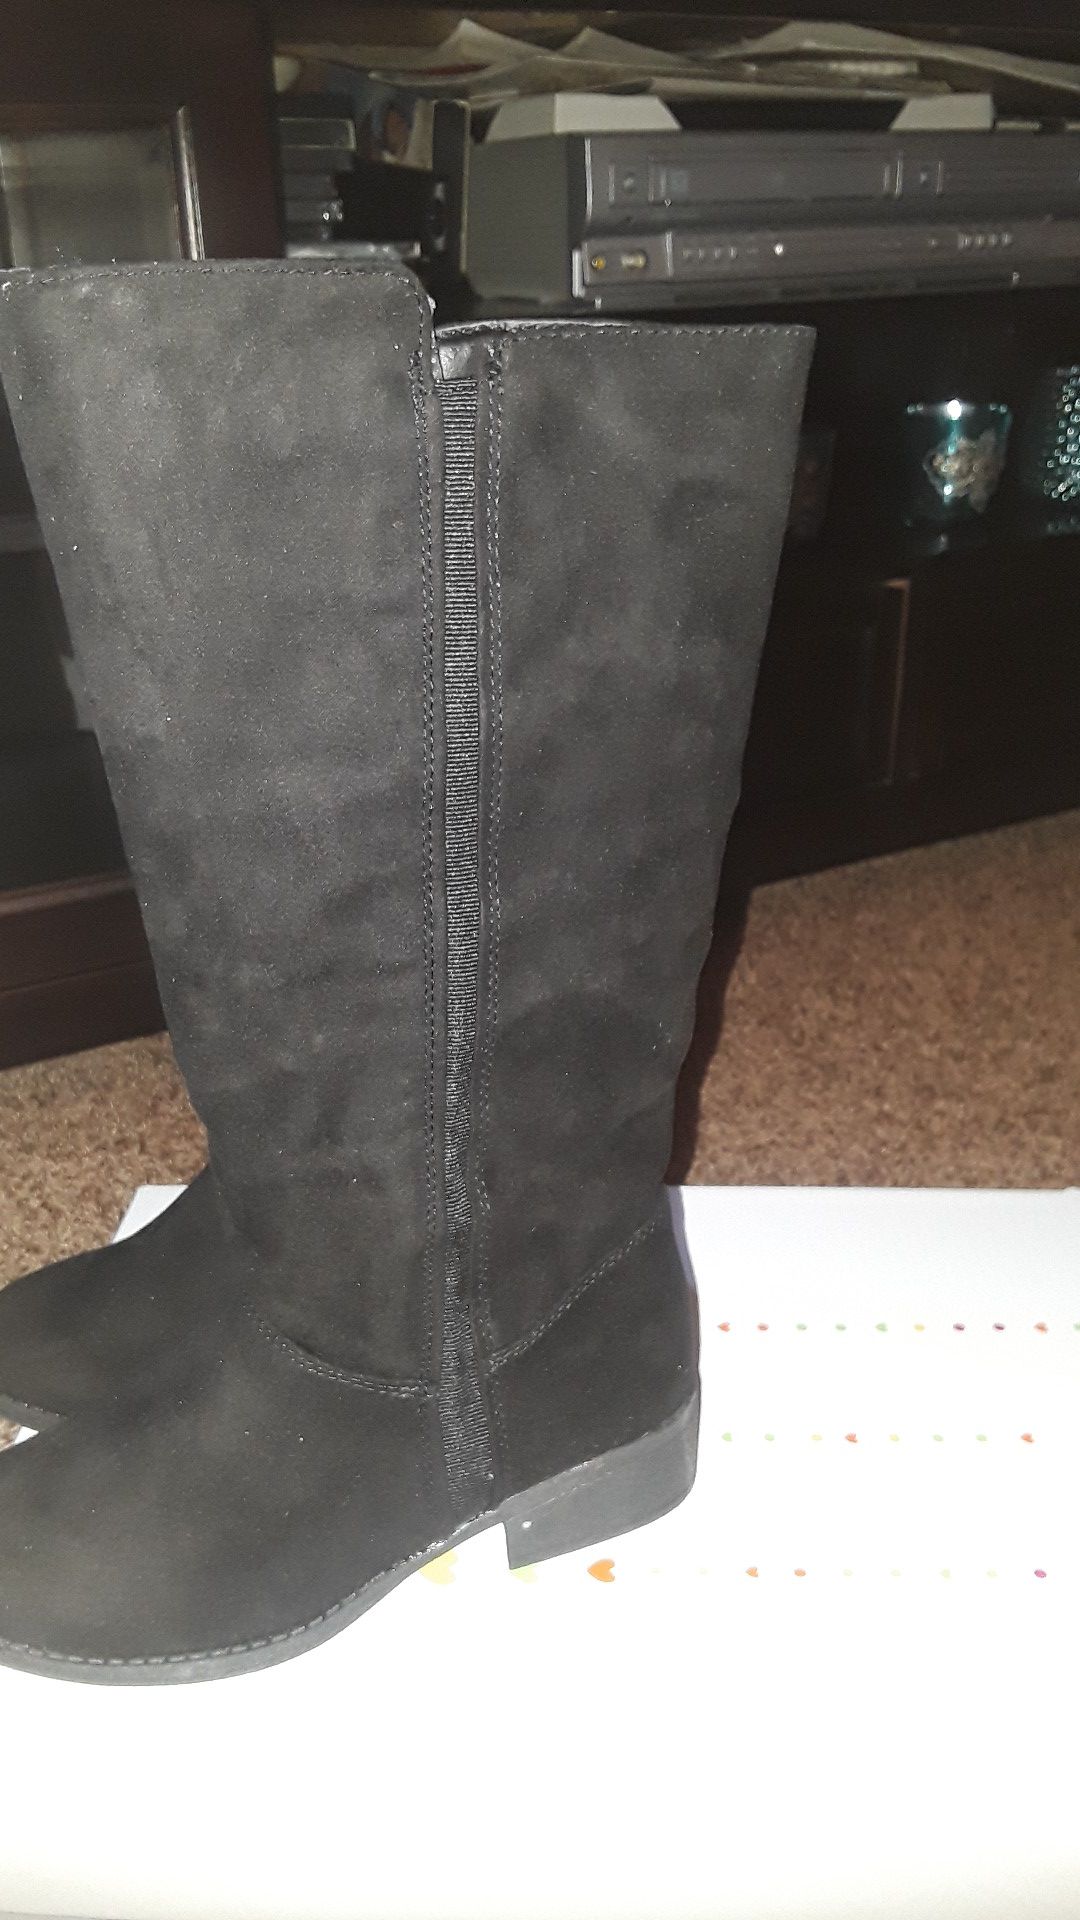 New black girls boots size 2